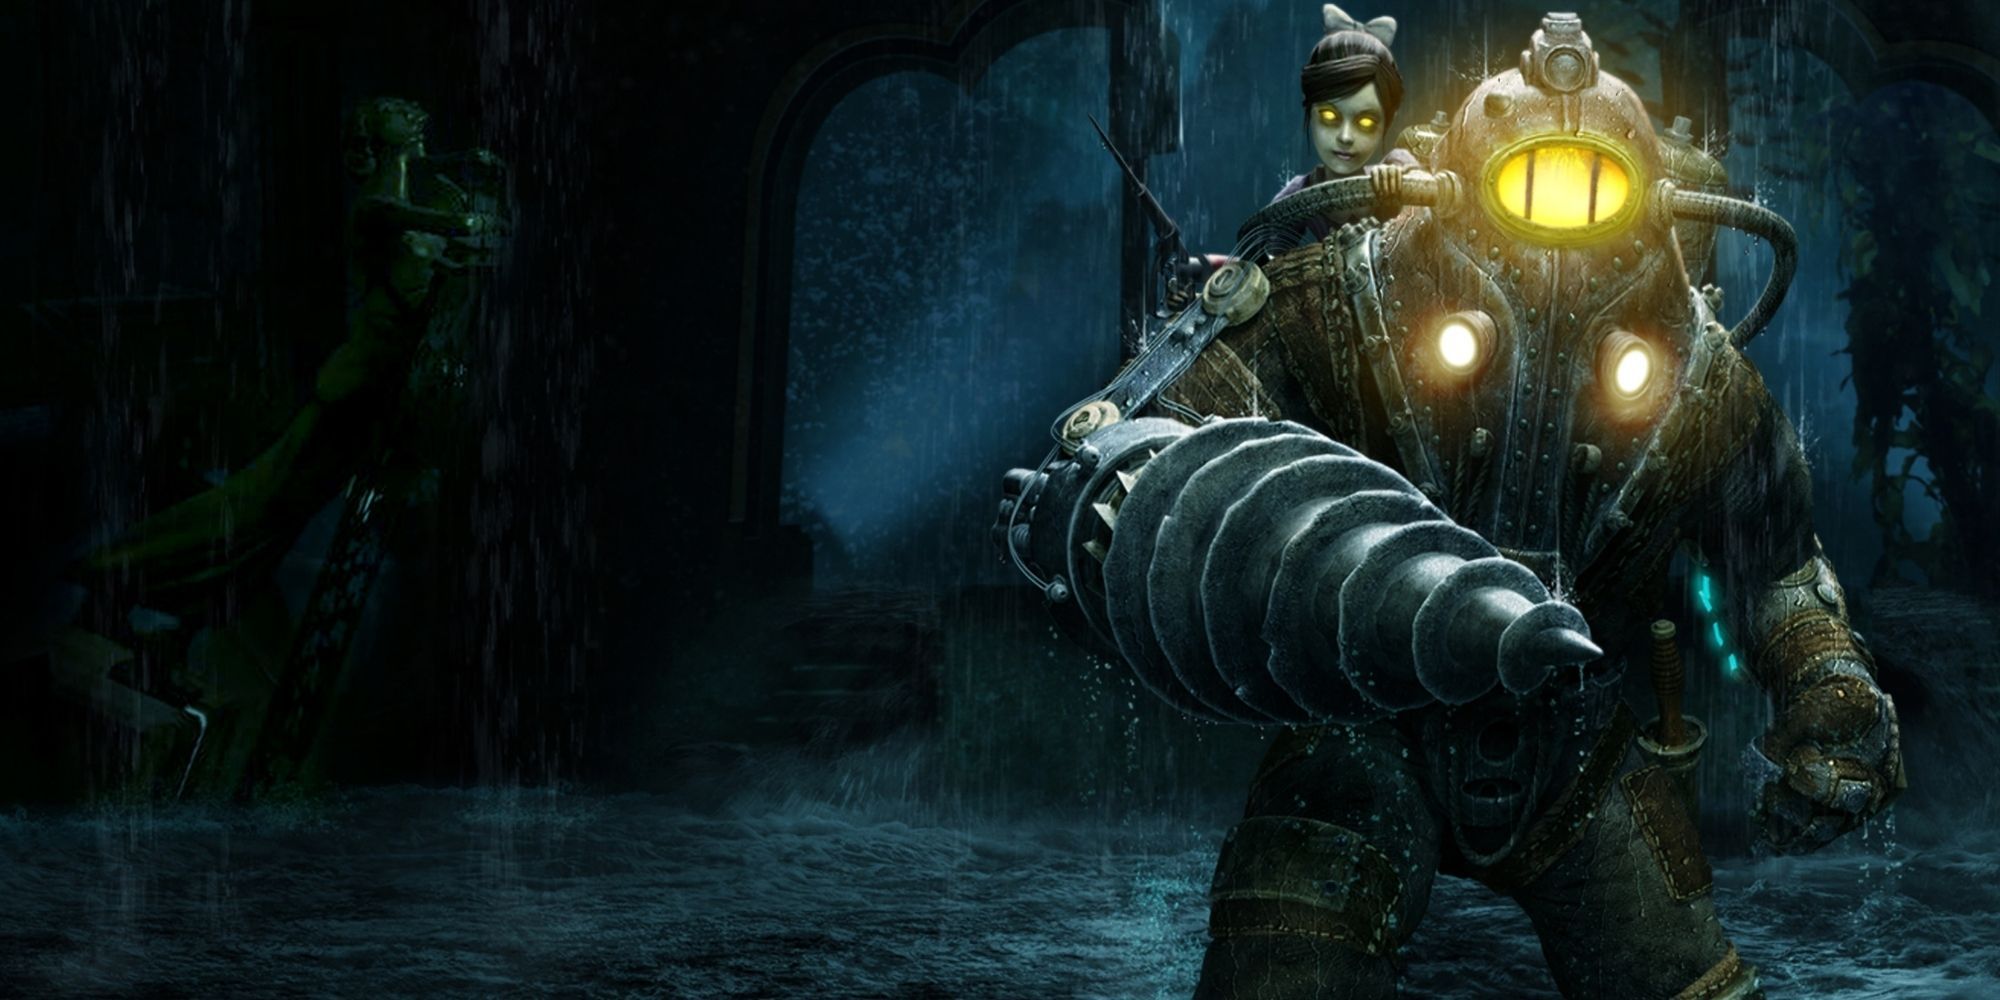 Key art from Bioshock 2, showing Subject Delta with a Liitle Sister on his shoulder